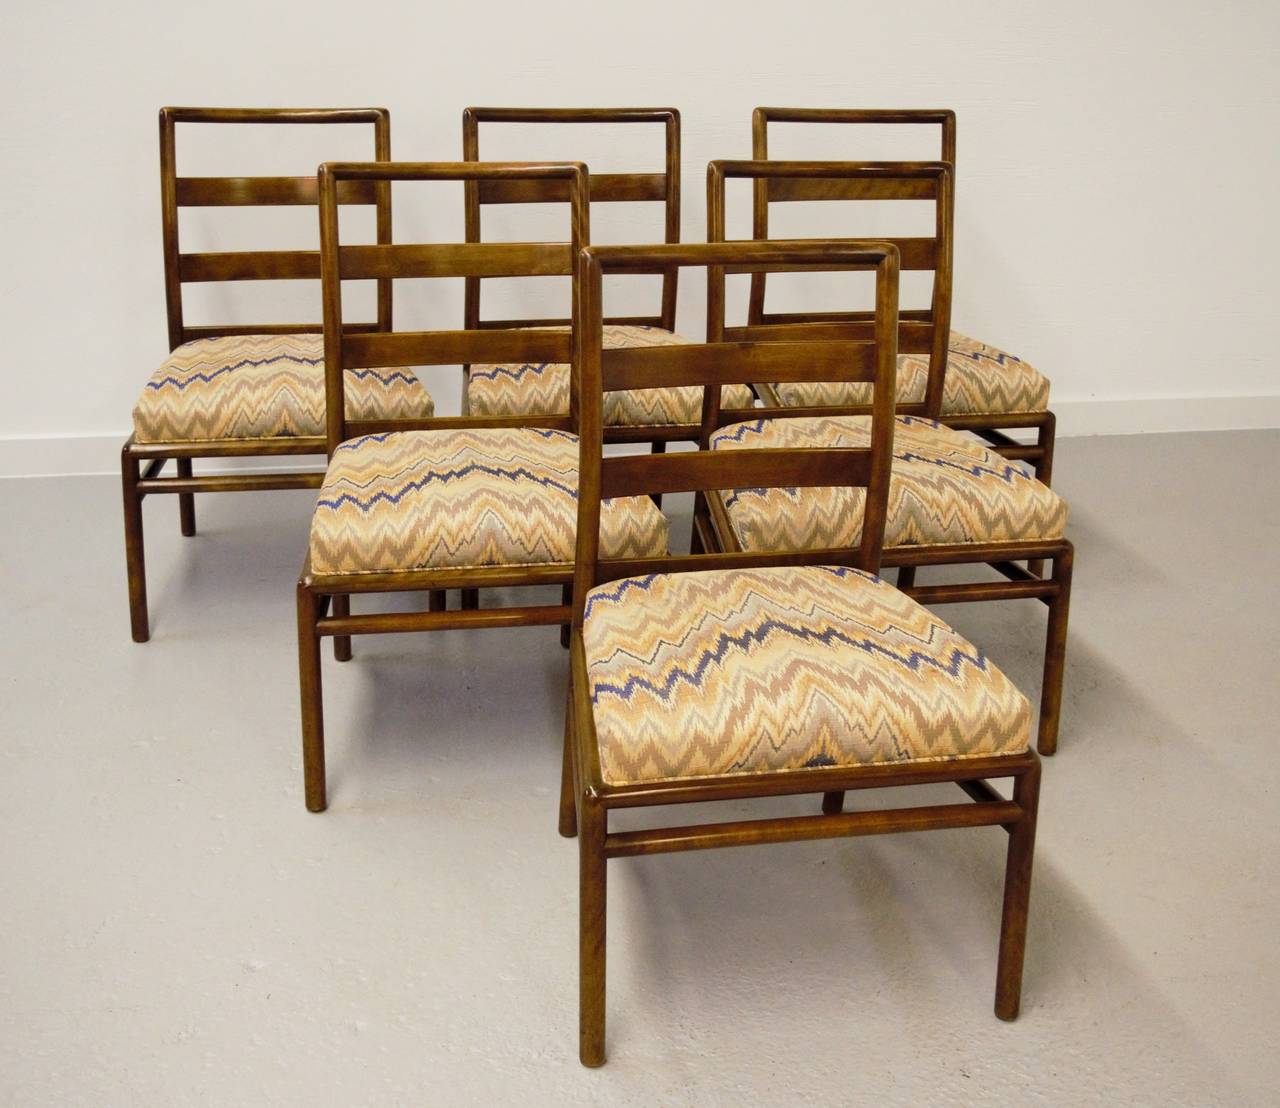 Six ladder back dining chairs by T.H. Robsjohn-Gibbings for Widdicomb.